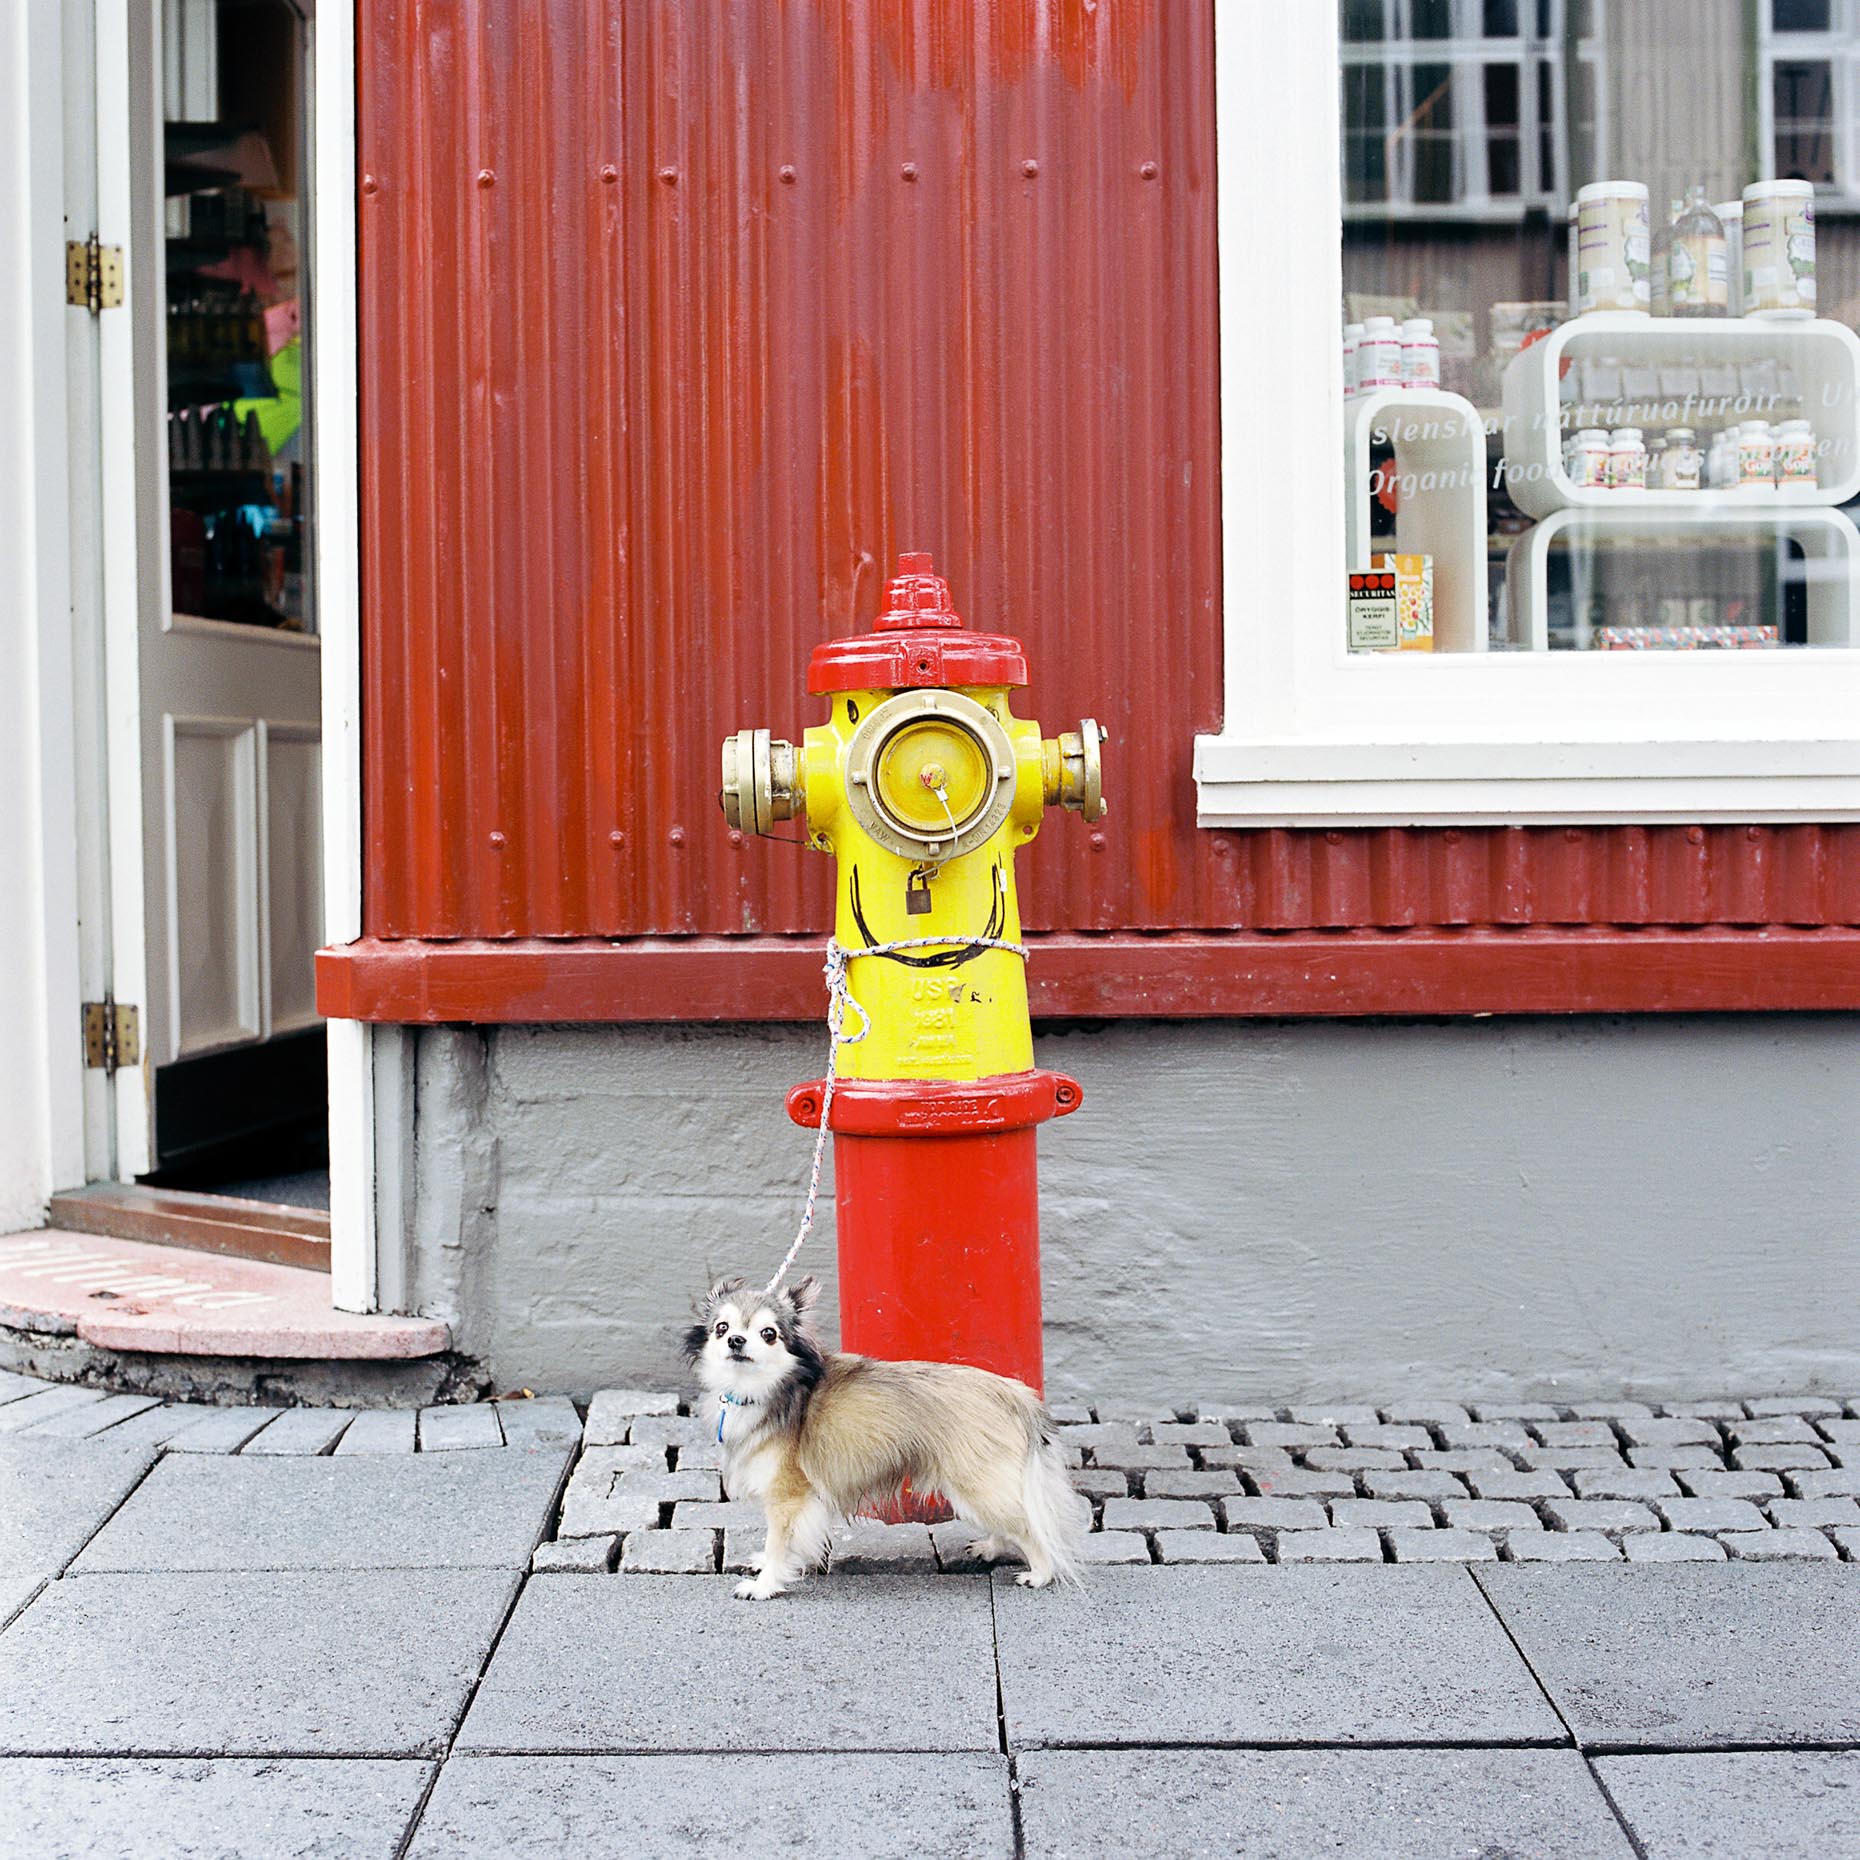 A small dog catches my attention as he waits next to a fire hydrant in Reykjavik, Iceland.